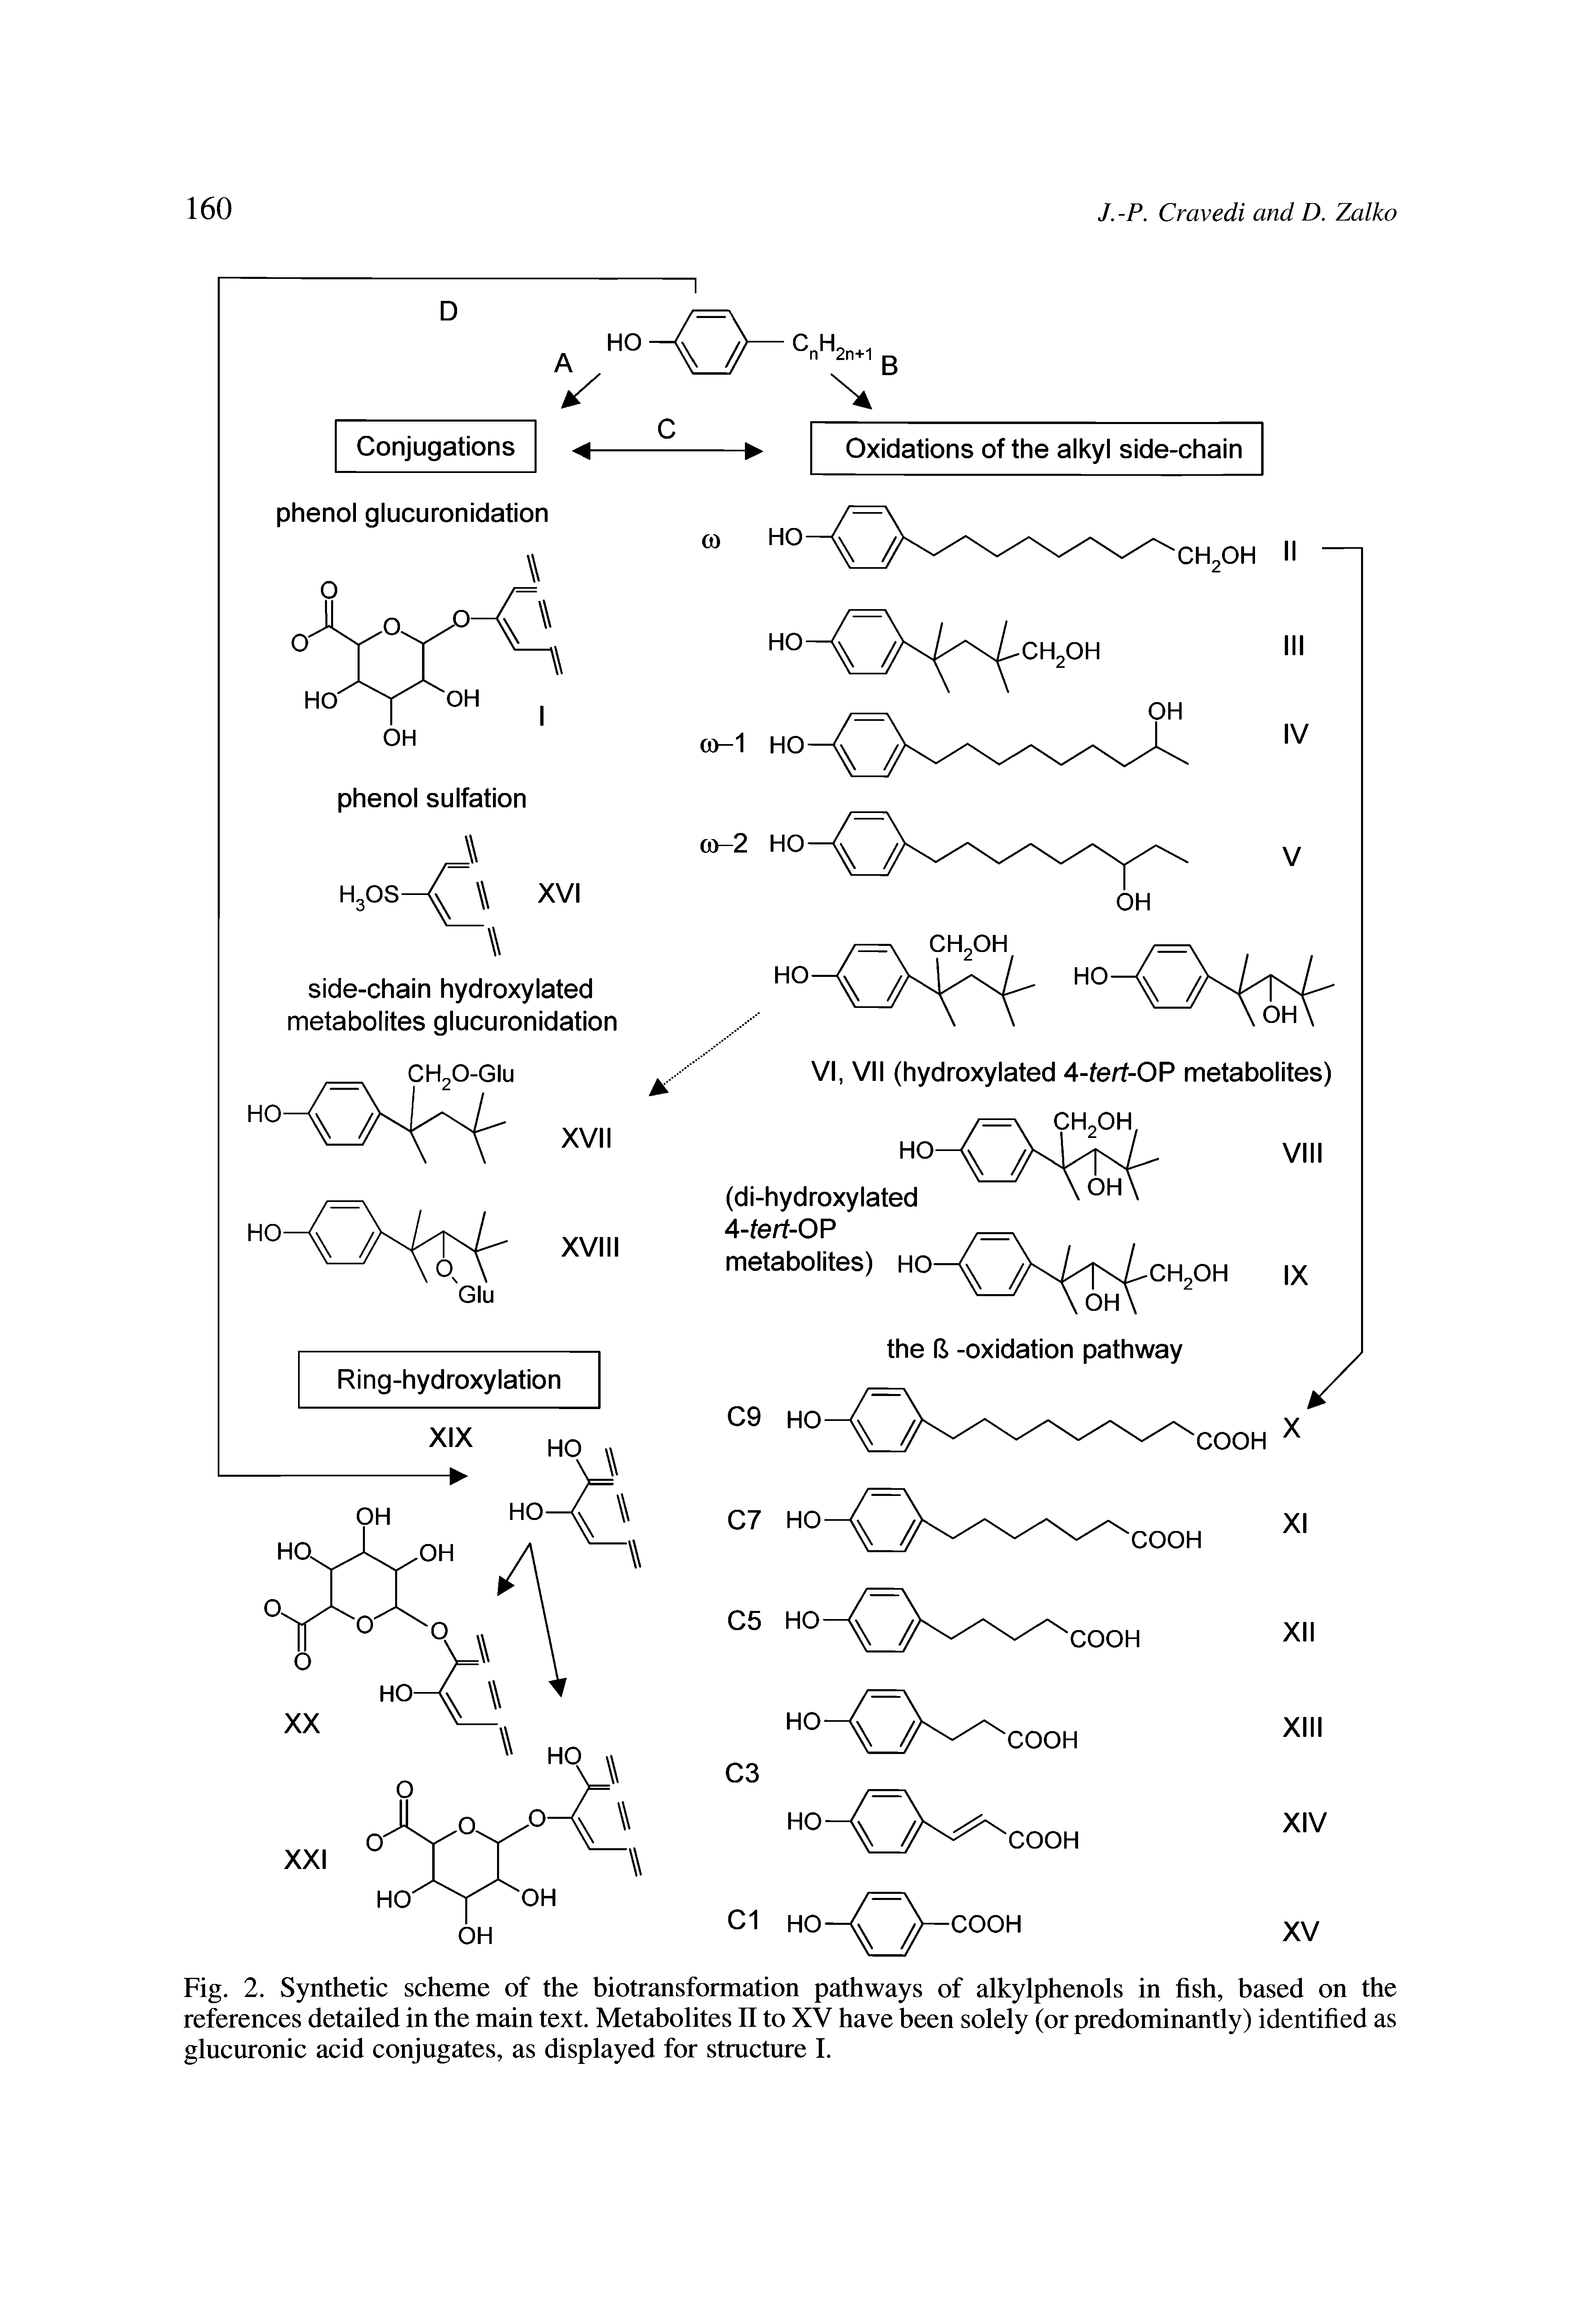 Fig. 2. Synthetic scheme of the biotransformation pathways of alkylphenols in fish, based on the references detailed in the main text. Metabolites II to XV have been solely (or predominantly) identified as glucuronic acid conjugates, as displayed for structure I.